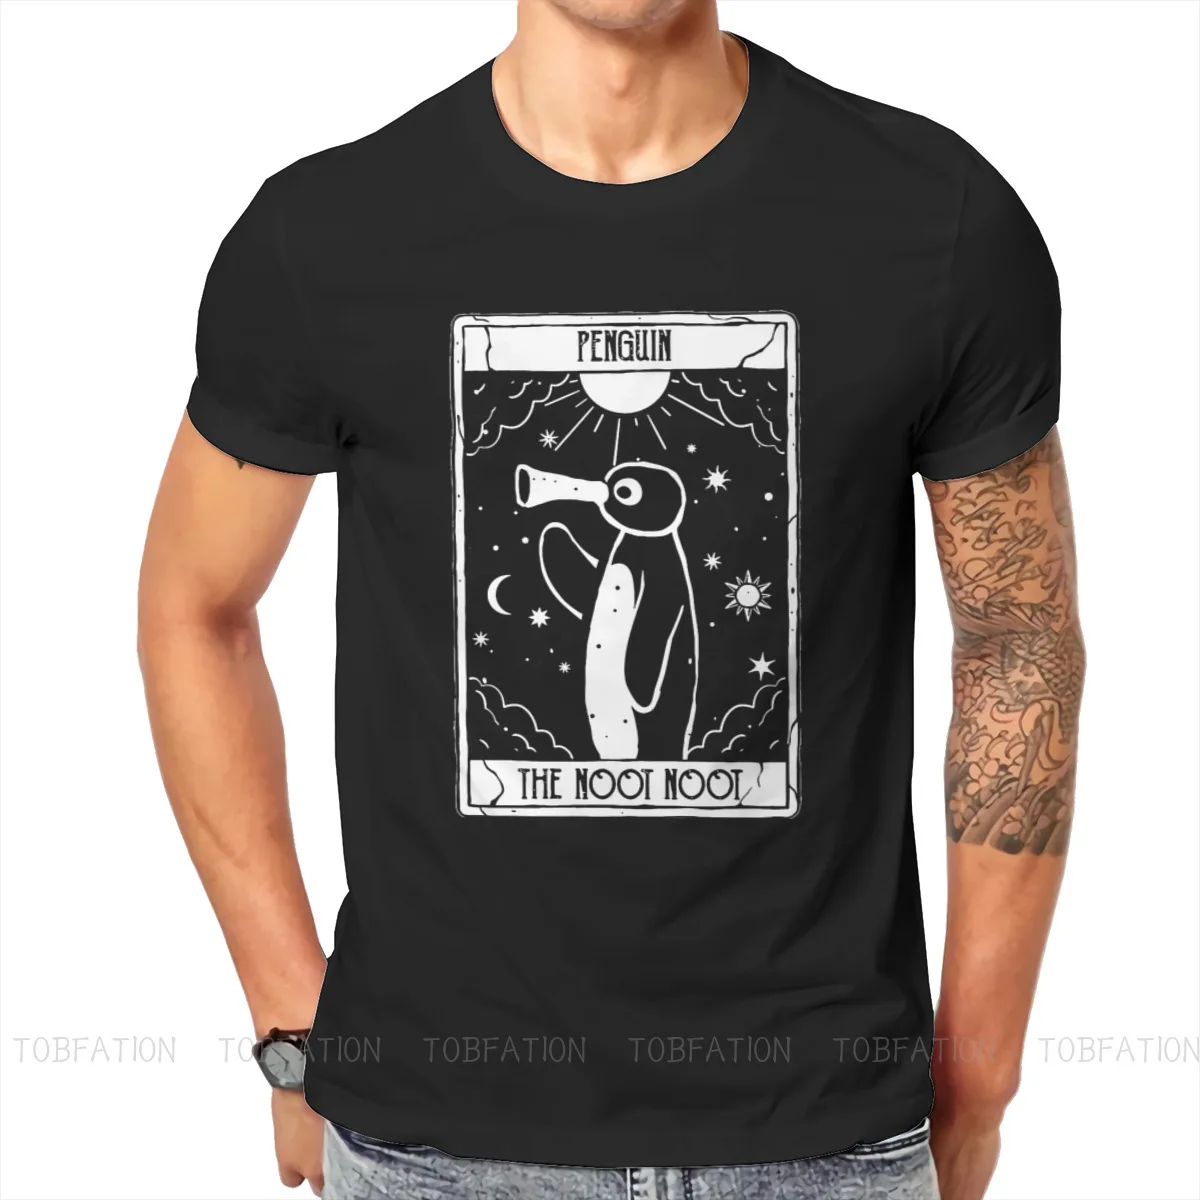 

Pingu Noot Pinga Penguin TV 100% Cotton TShirts Funny Tarot Card Personalize Homme T Shirt Hipster Tops 6XL